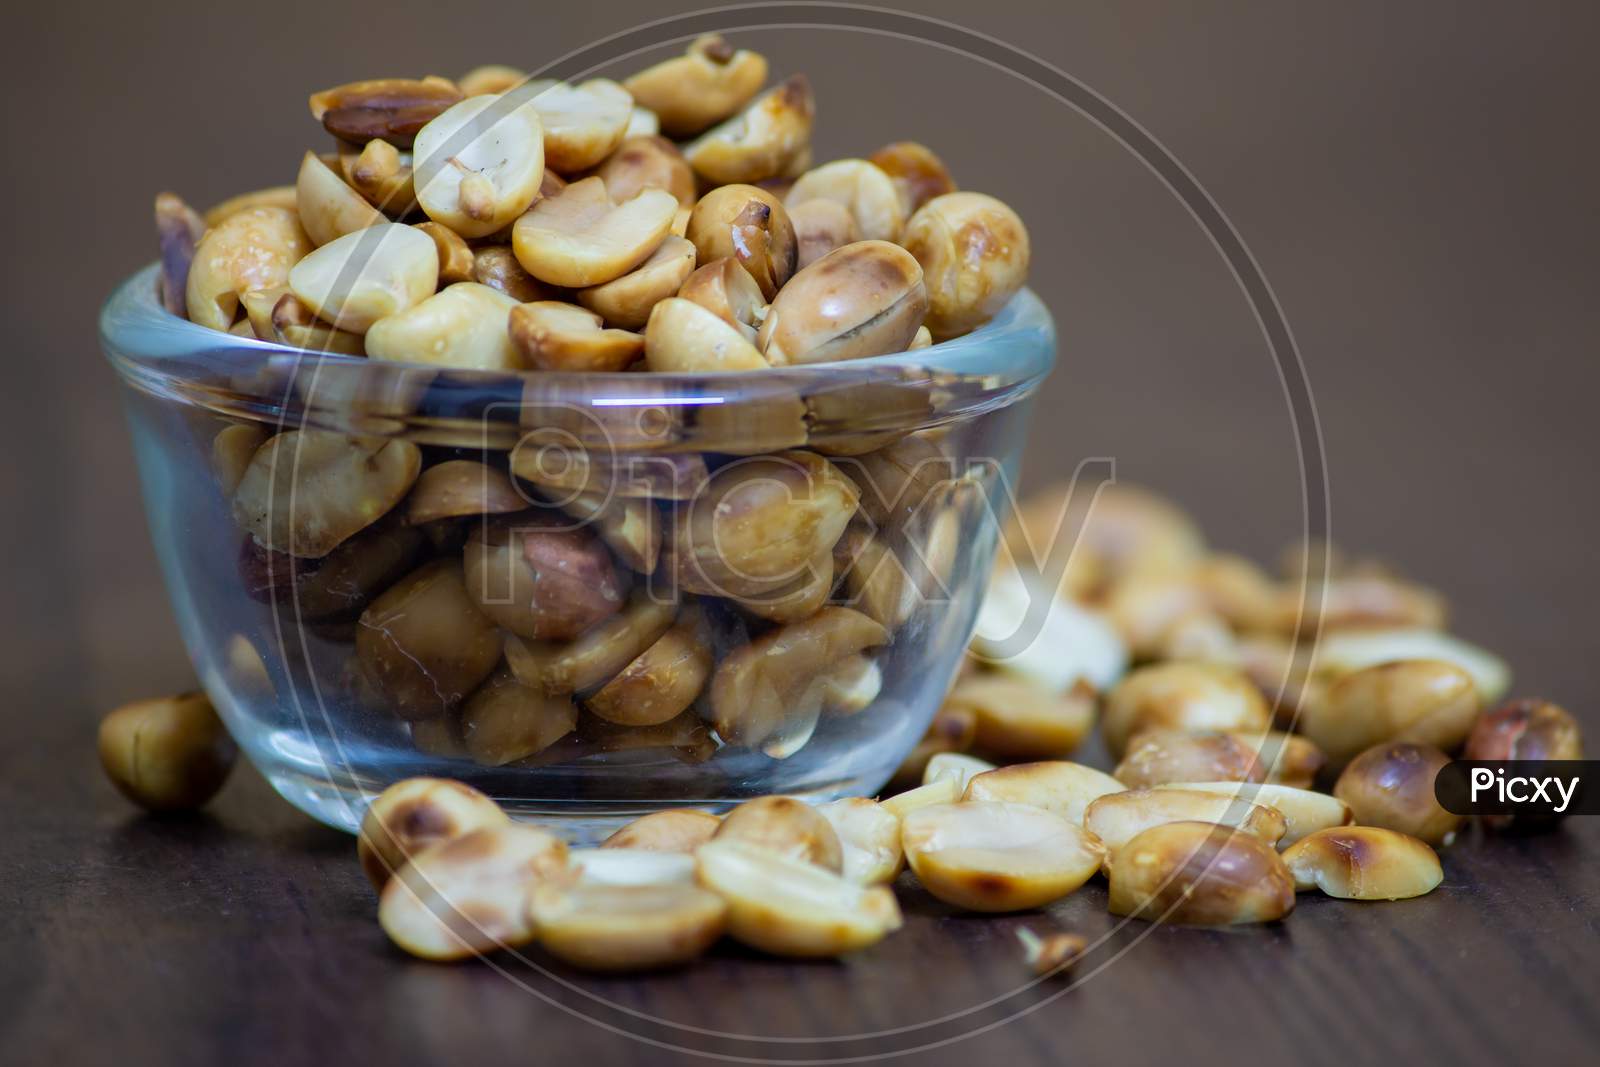 Roasted And Peeled Groundnut In A Bowl. Healthy Snack Rich In Protein.